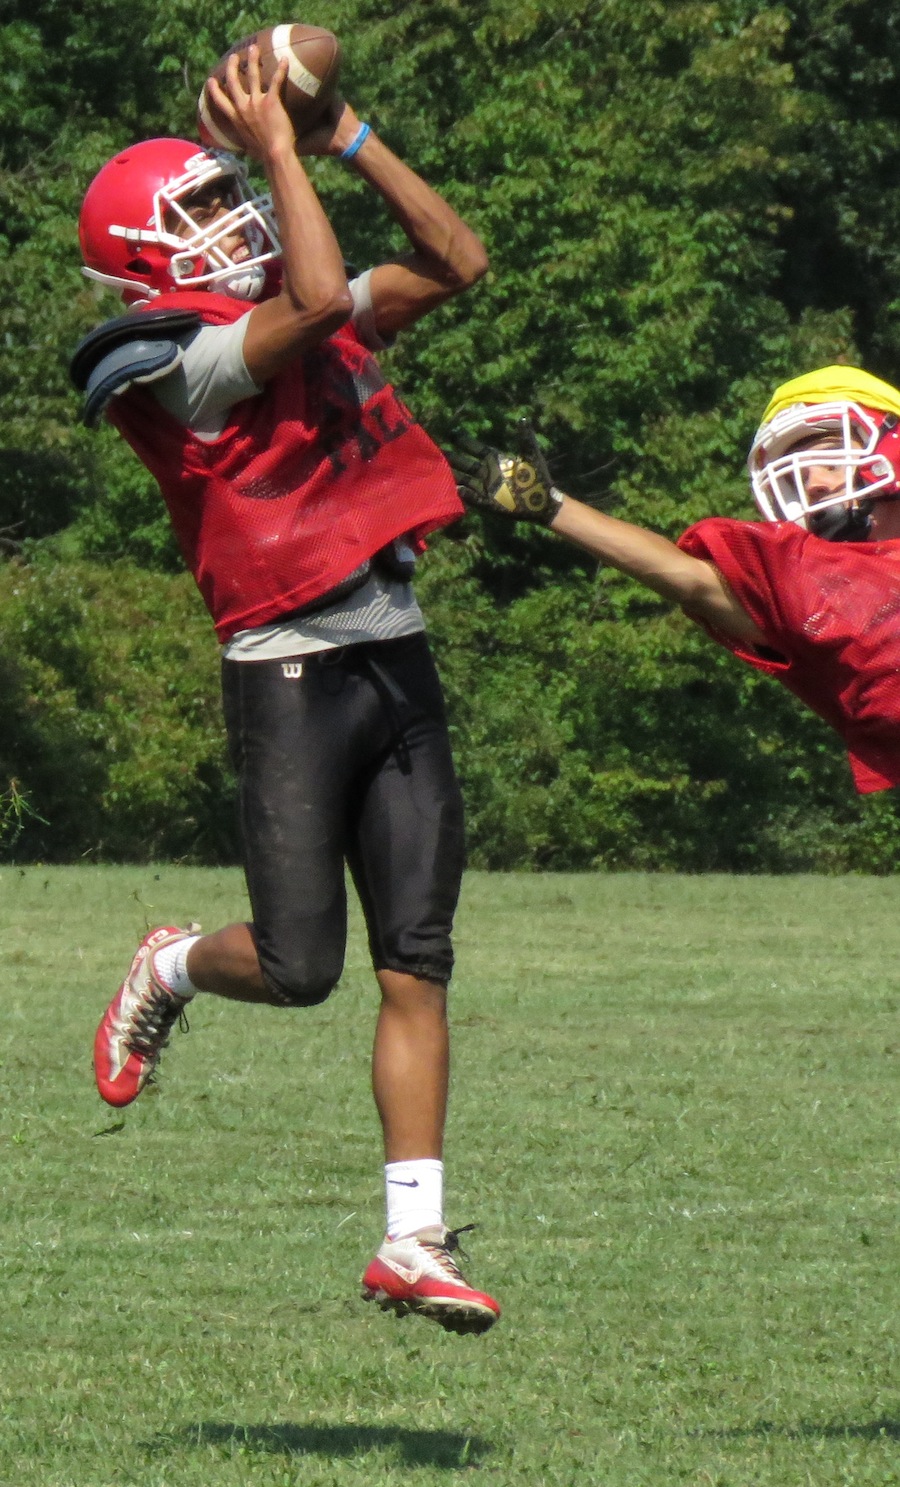 Jordan Parks goes up and catches a pass from Chris Gordon III during practice. (All photos by David Yarger)